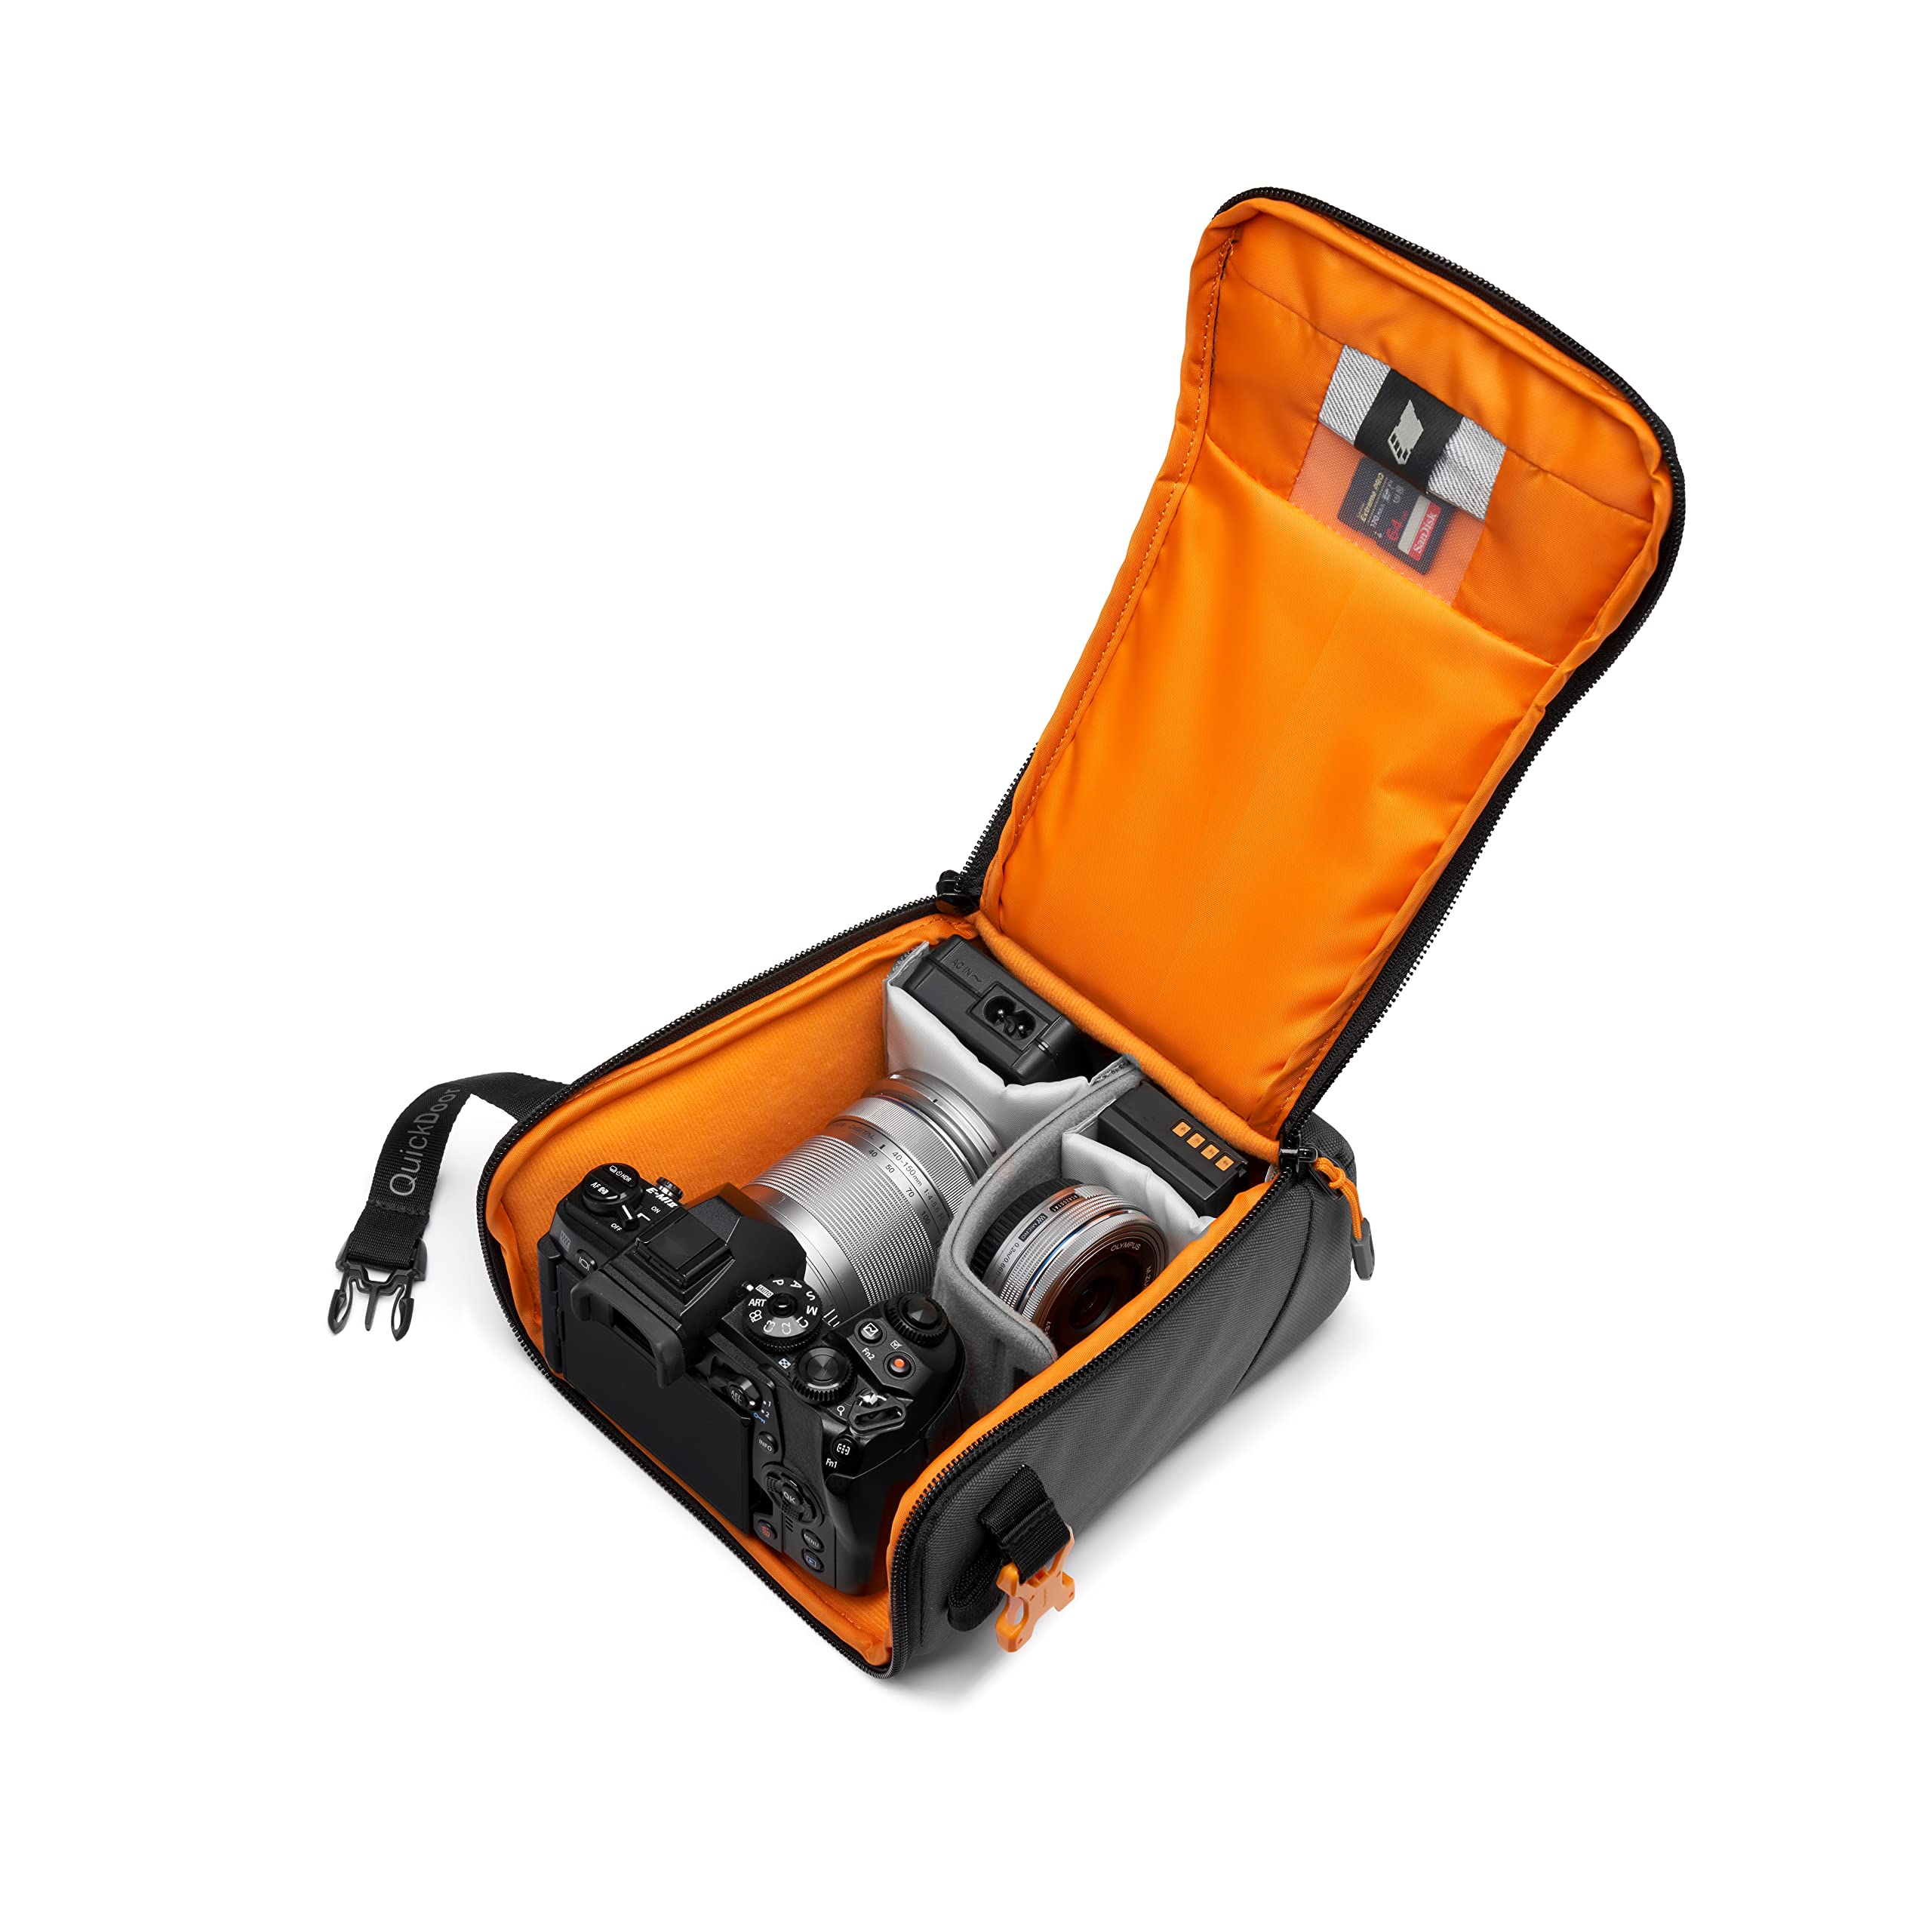 Lowepro GearUp Creator Box Medium II, Mirrorless and DSLR Camera Bag, Camera Case with QuickDoor Access, Made with Recycled Fabric, Orange Padded Interior Dividers, Grey